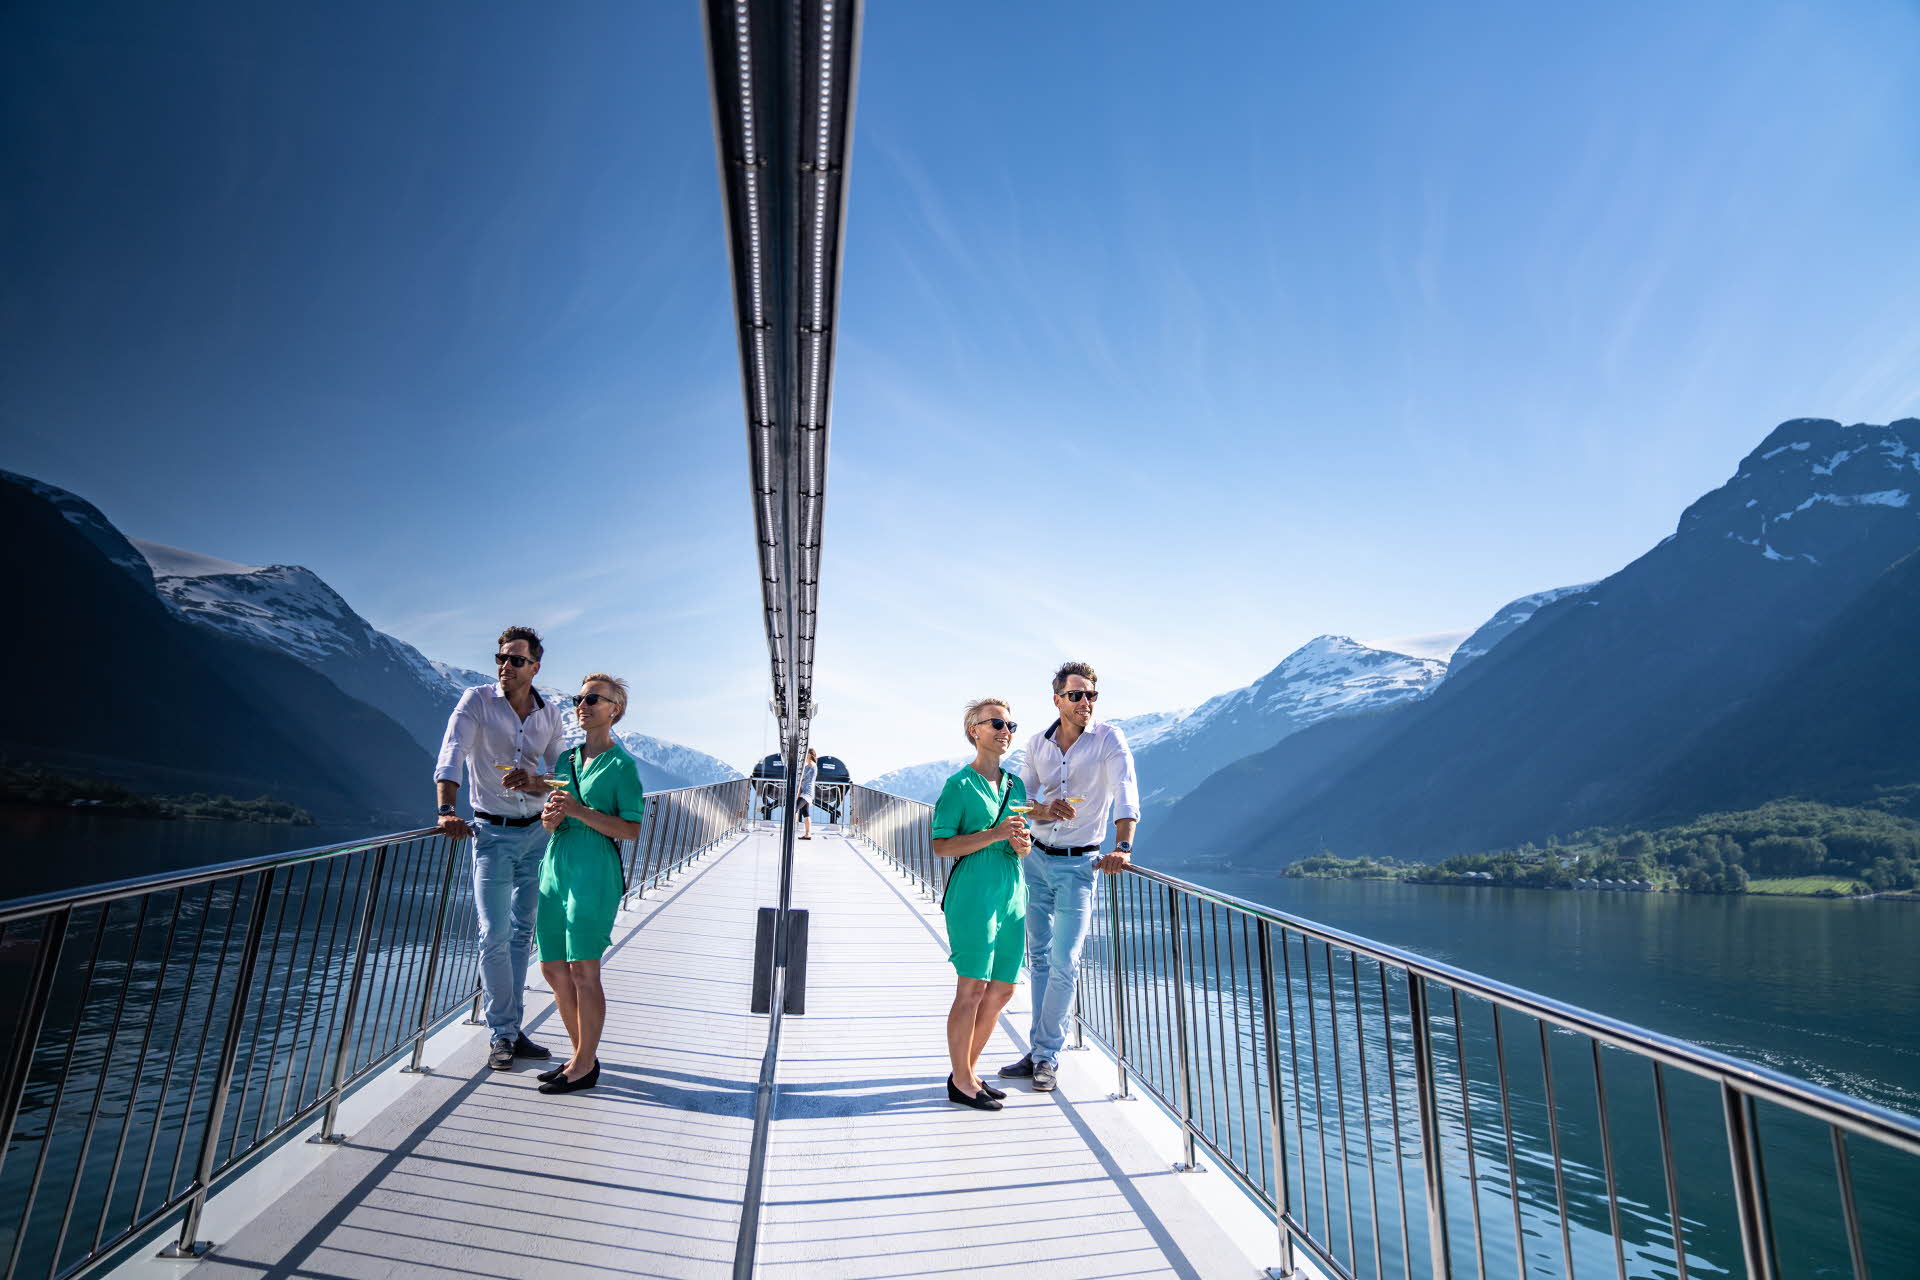 A man and a woman in summery clothing standing on boat deck on the Hardangerfjord. Windows reflect the scenery.